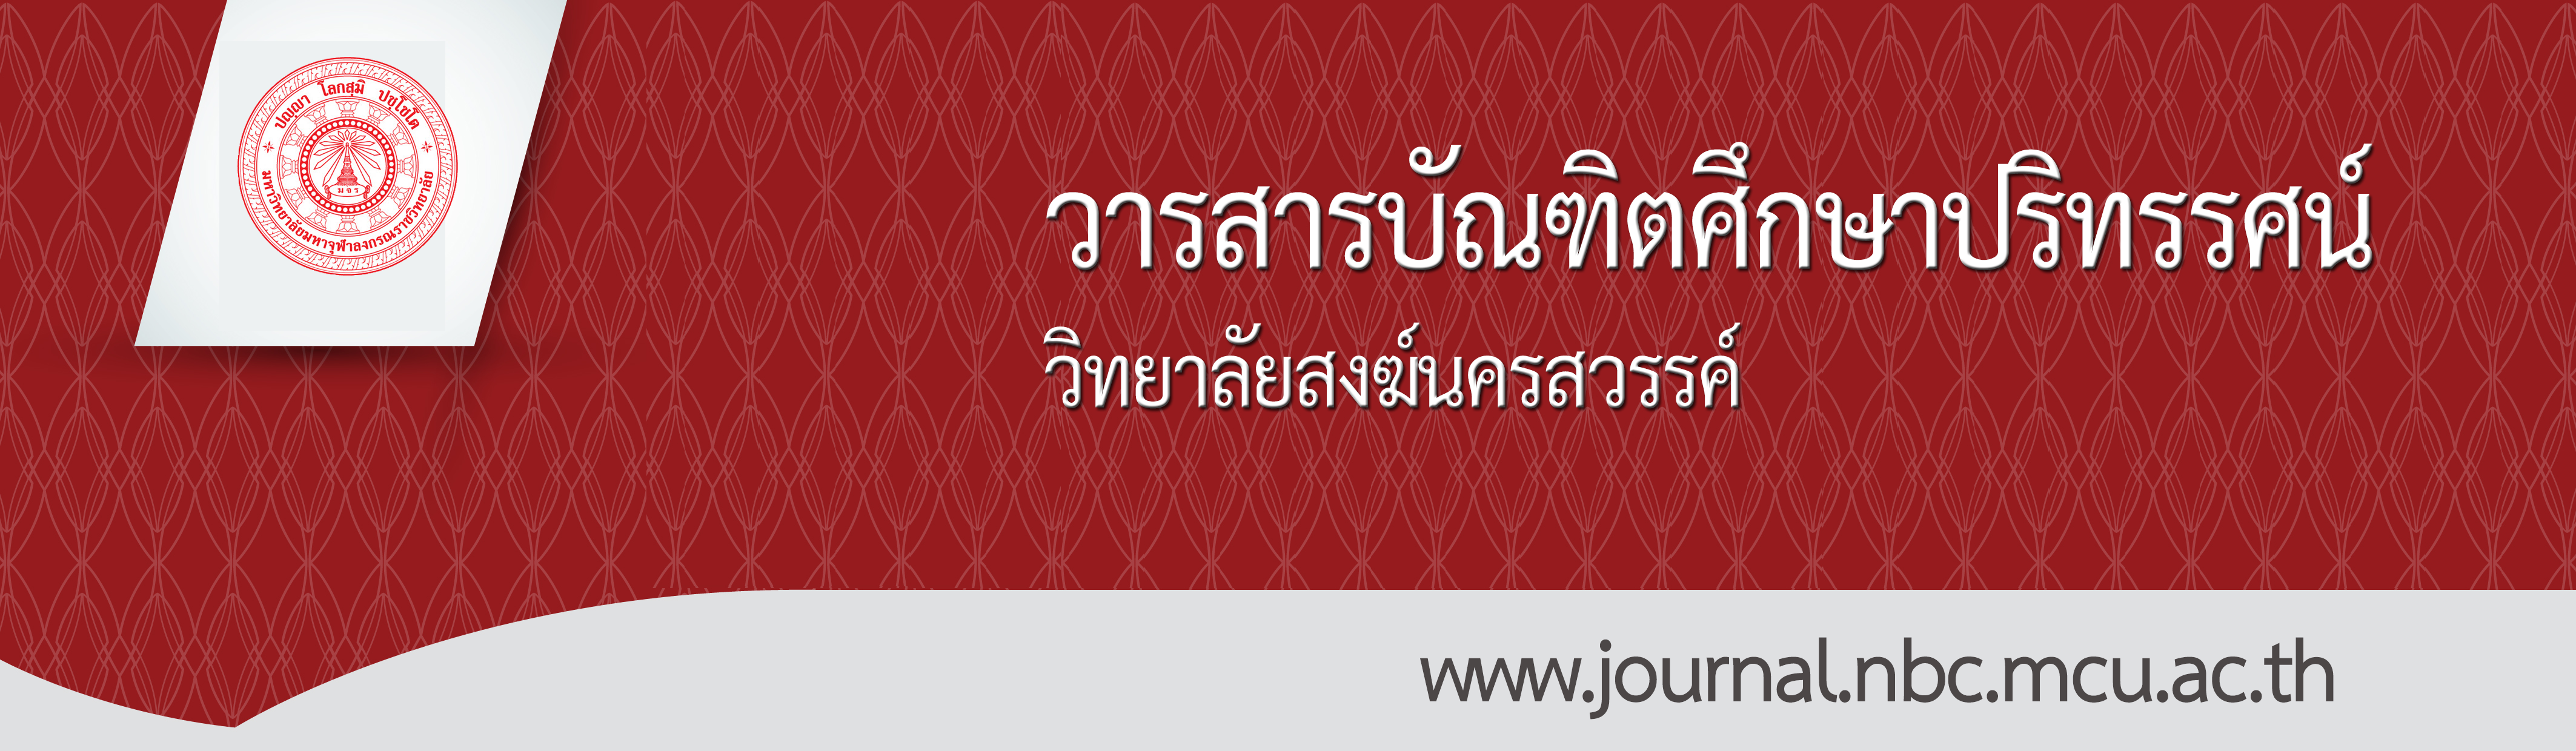 https://www.tci-thaijo.org/index.php/jgsnsbc-journal/index